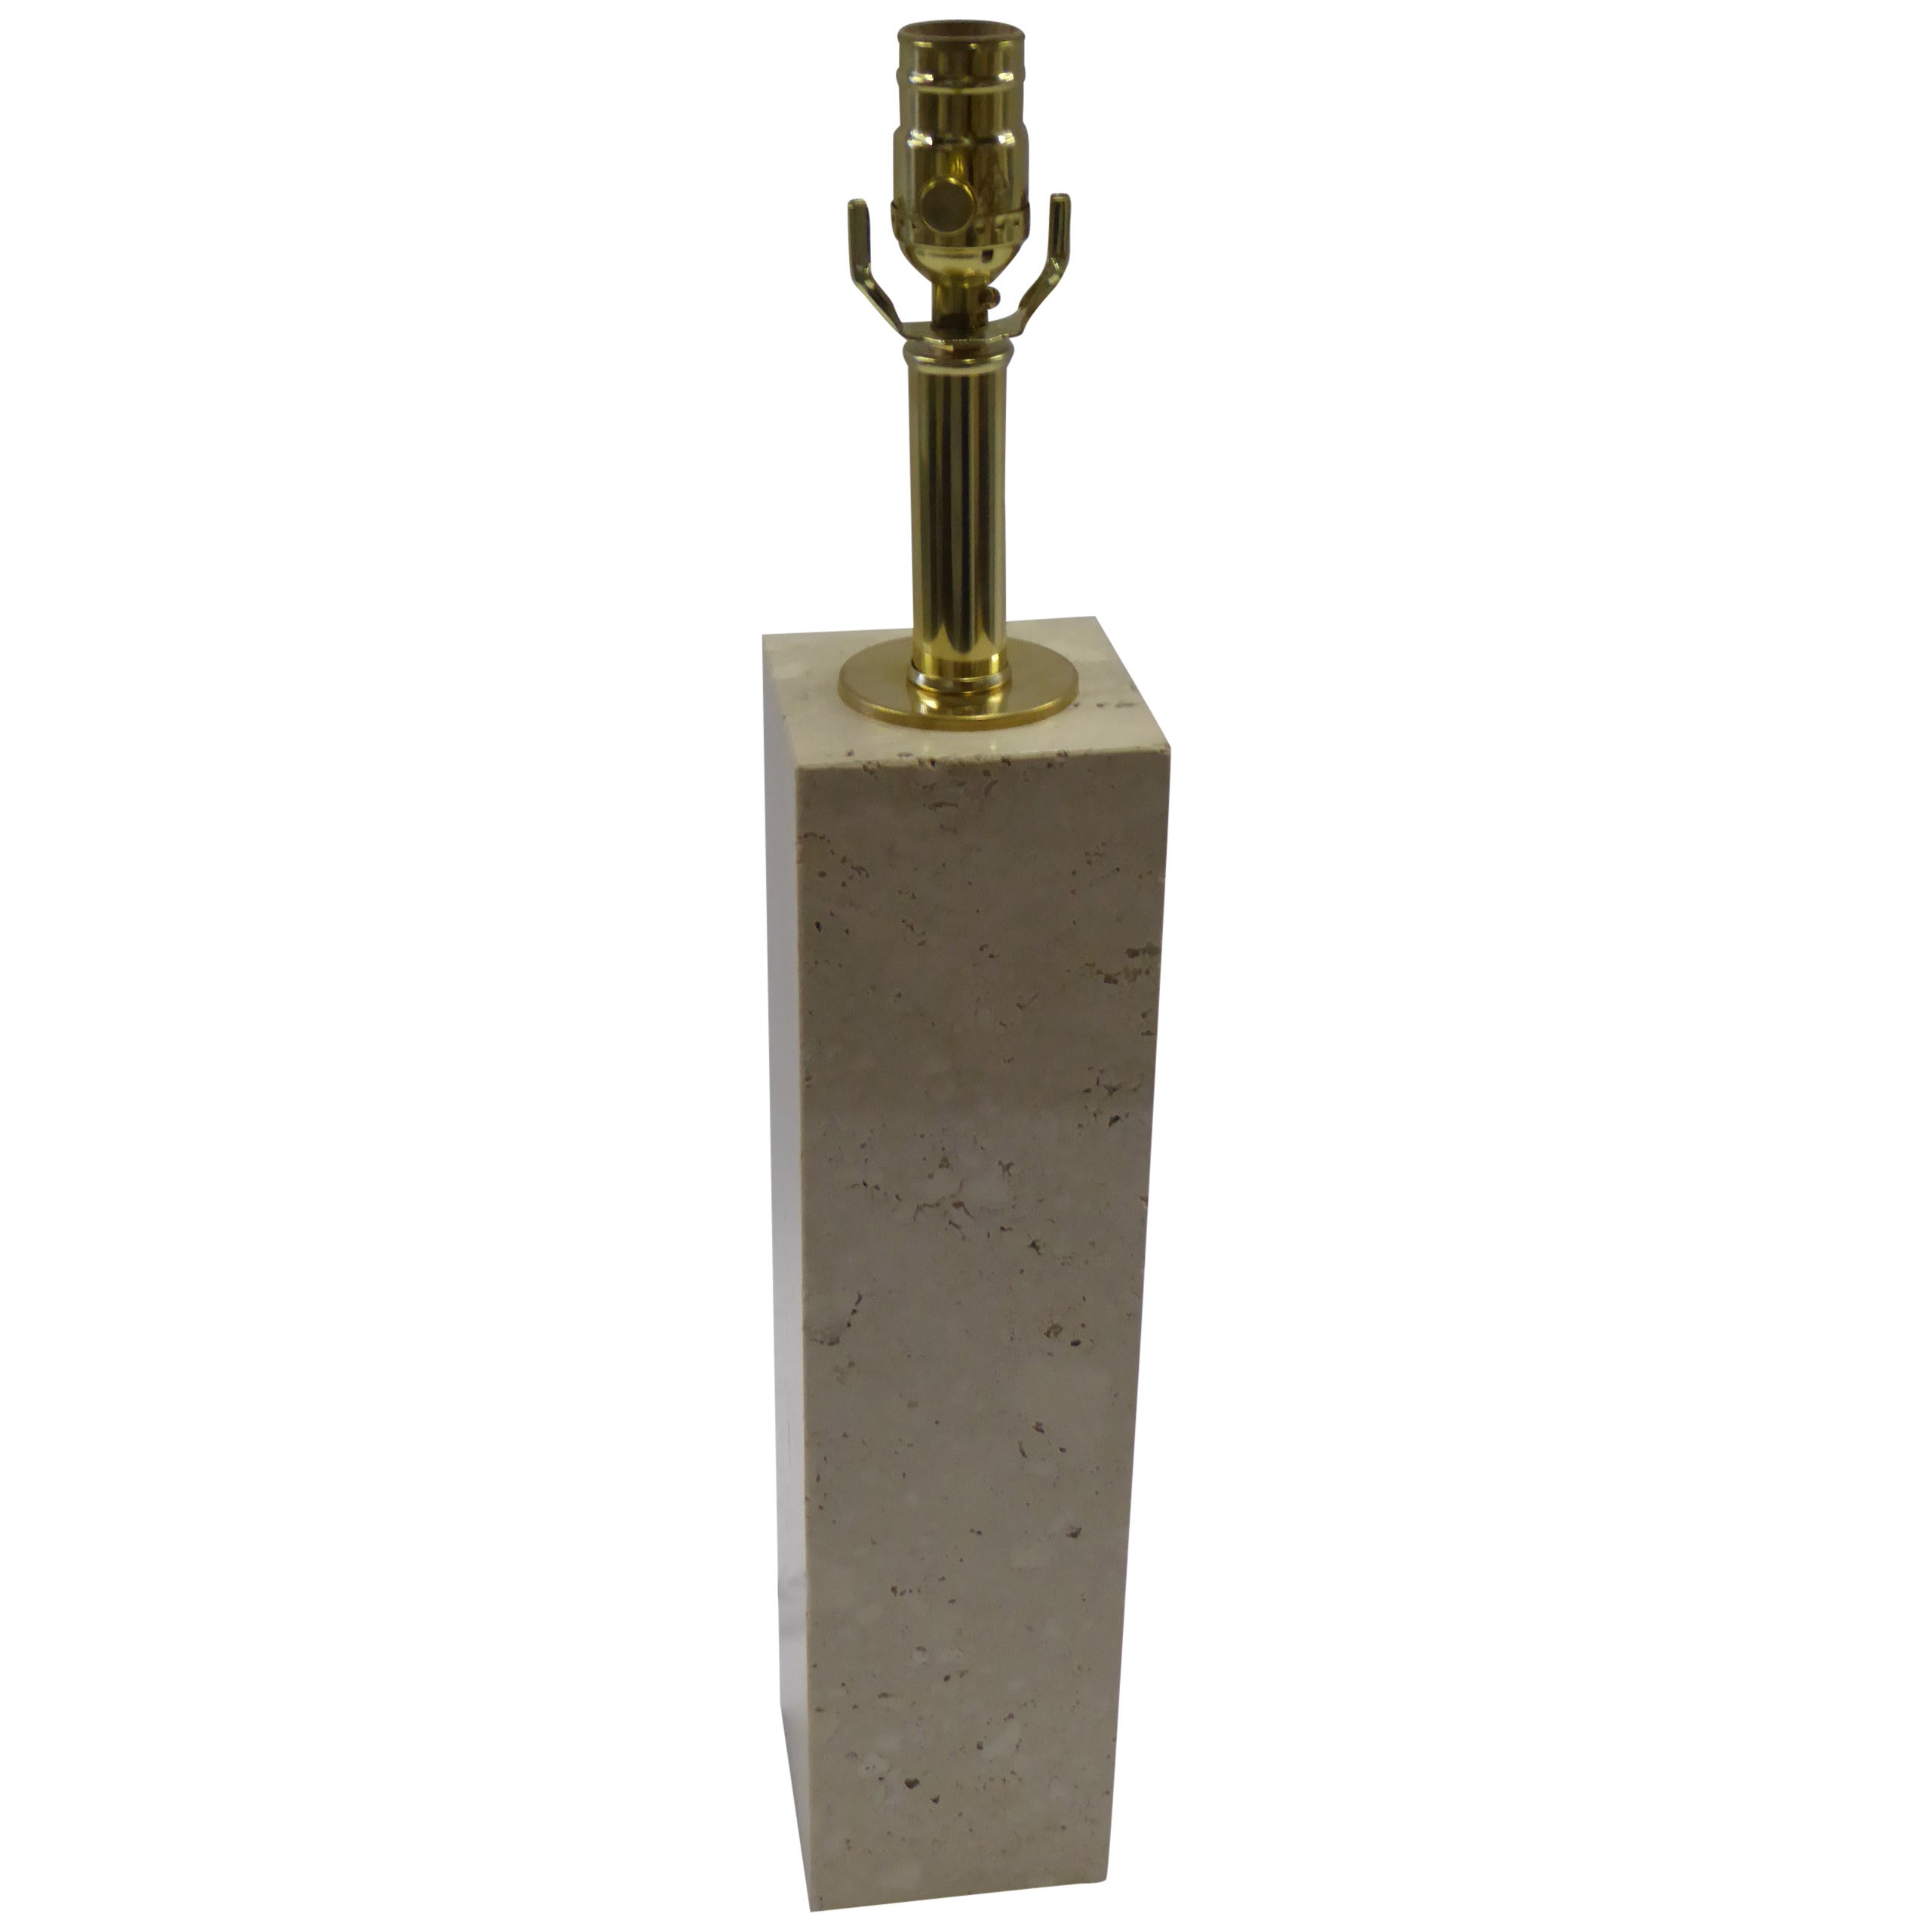 REDUCED FROM $1,200...Architectural and Minimalist in form, this midcentury modern rectangular tower of travertine marble is a modern statement attributed to T.H. Robsjohn-Gibbings. With brass collar and neck, it is quite urbane. The travertine body